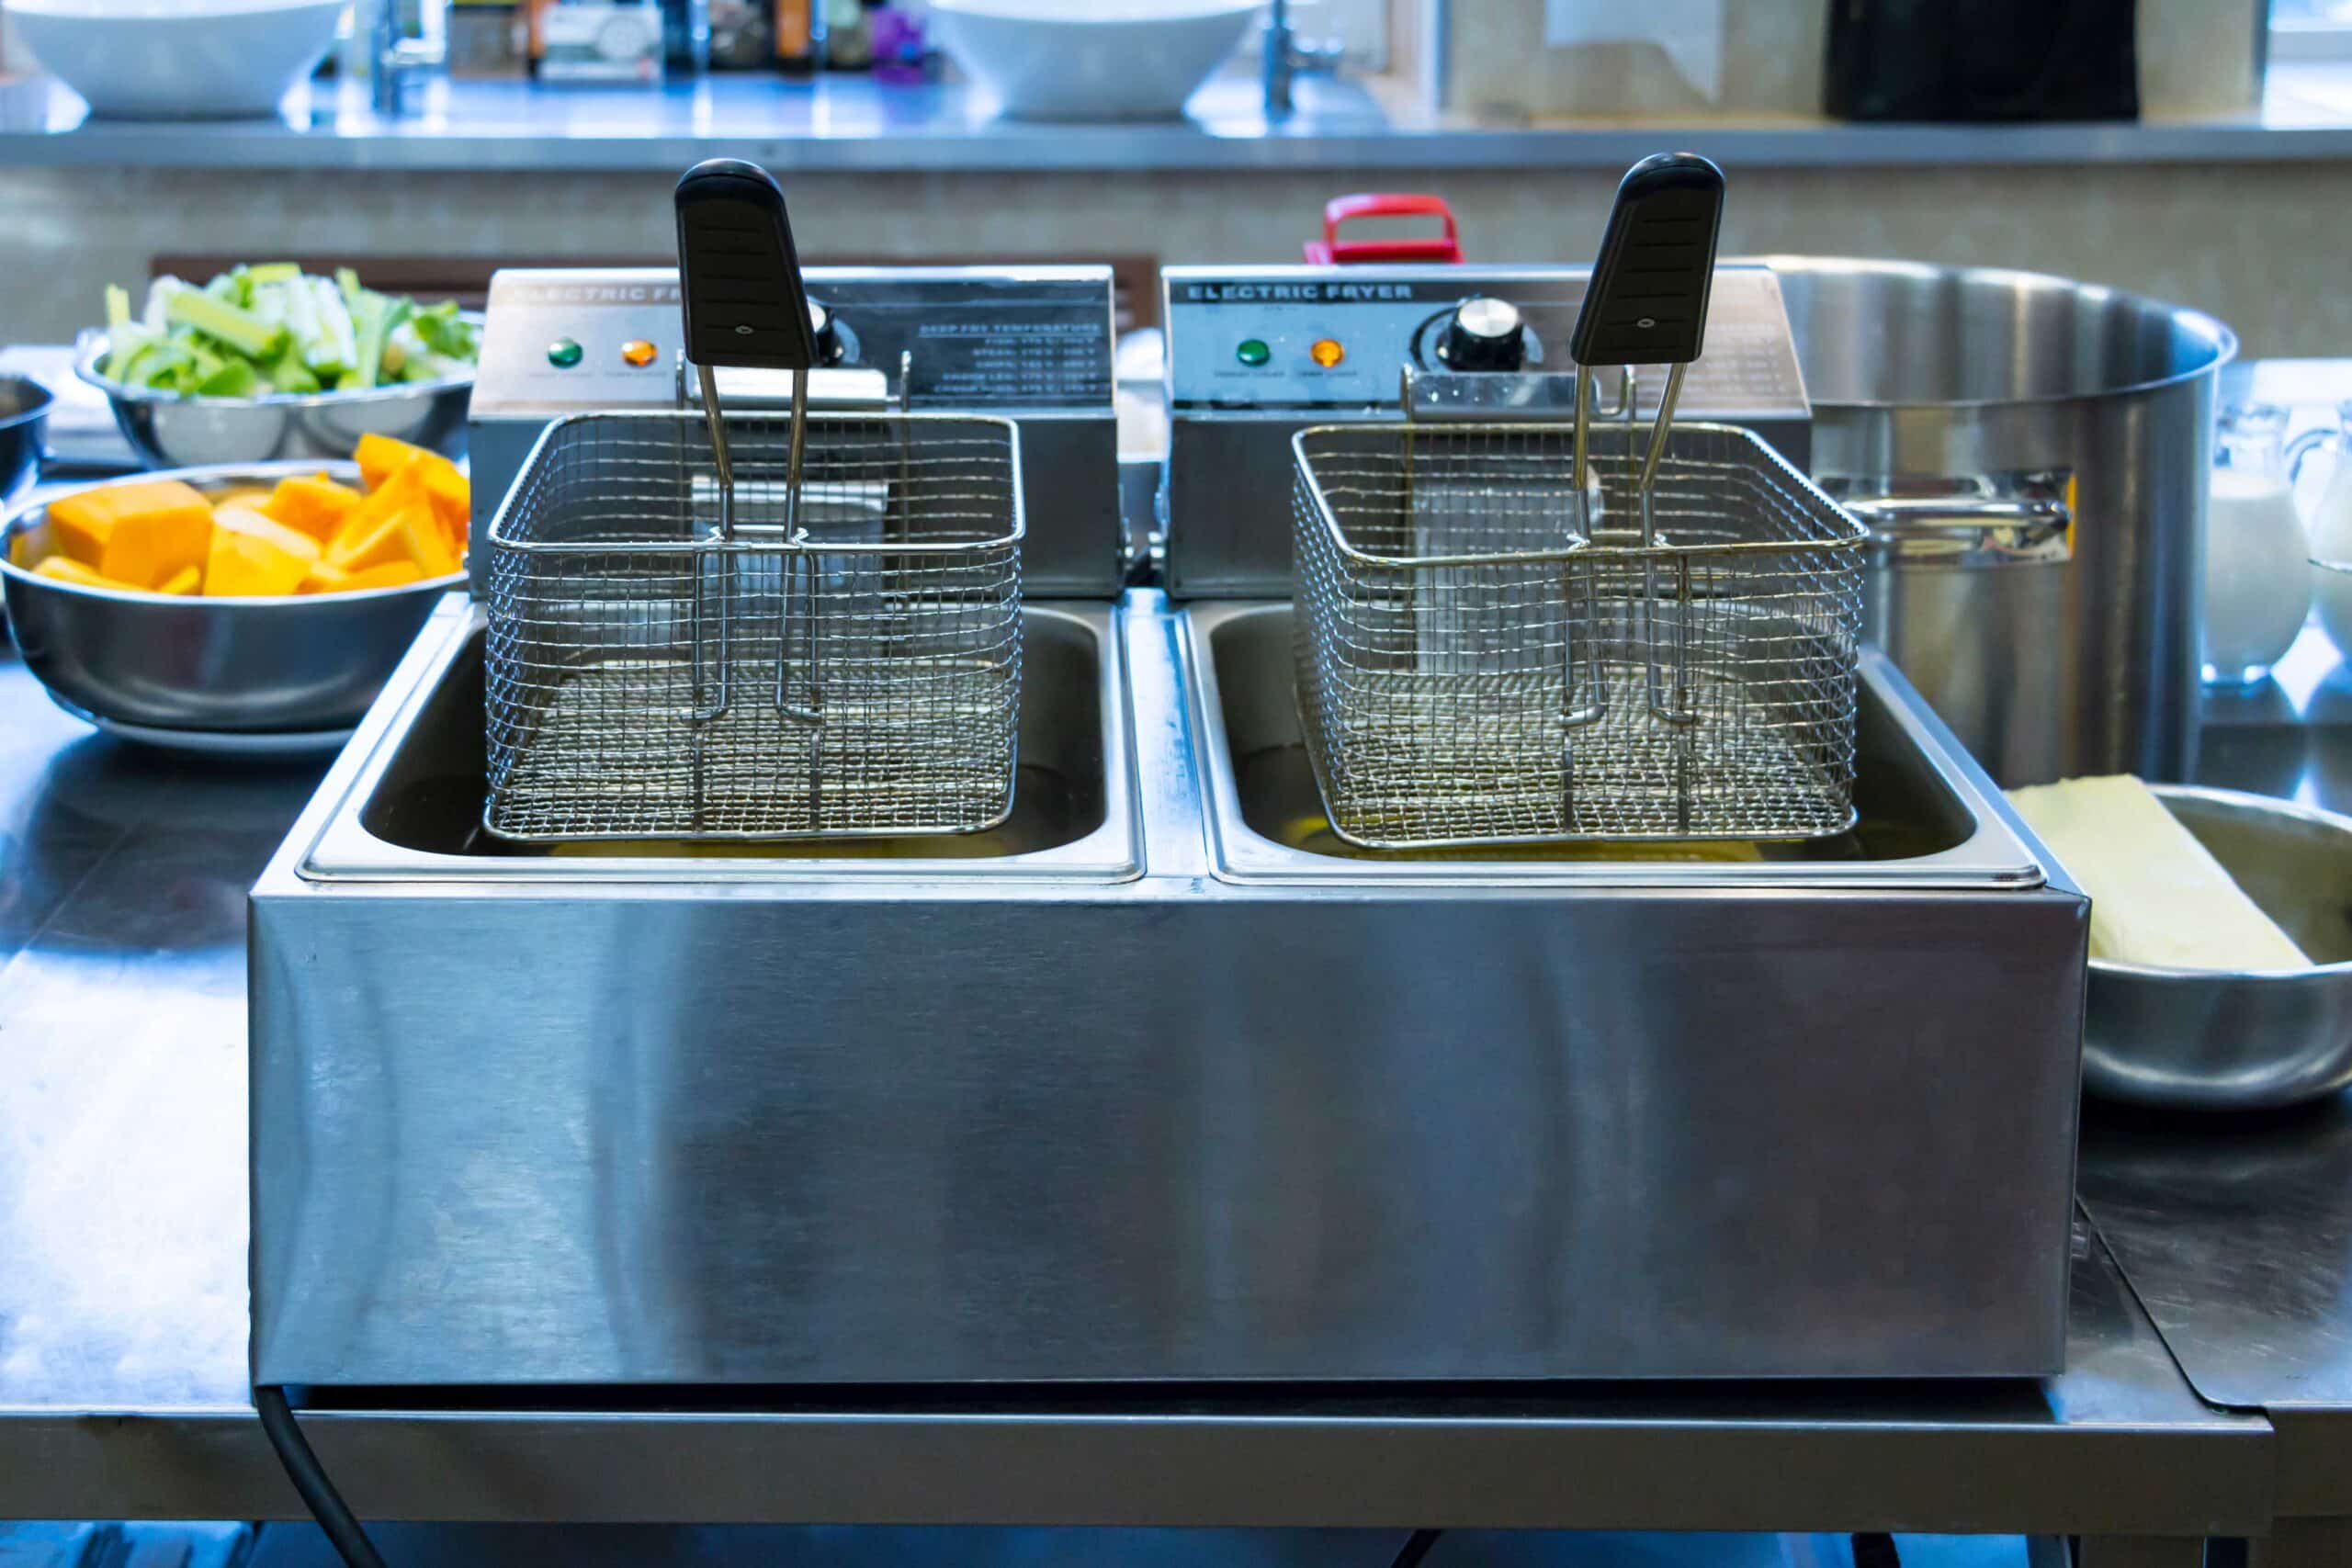 How to Choose the Right Fryer Oil - Restaurant Technologies